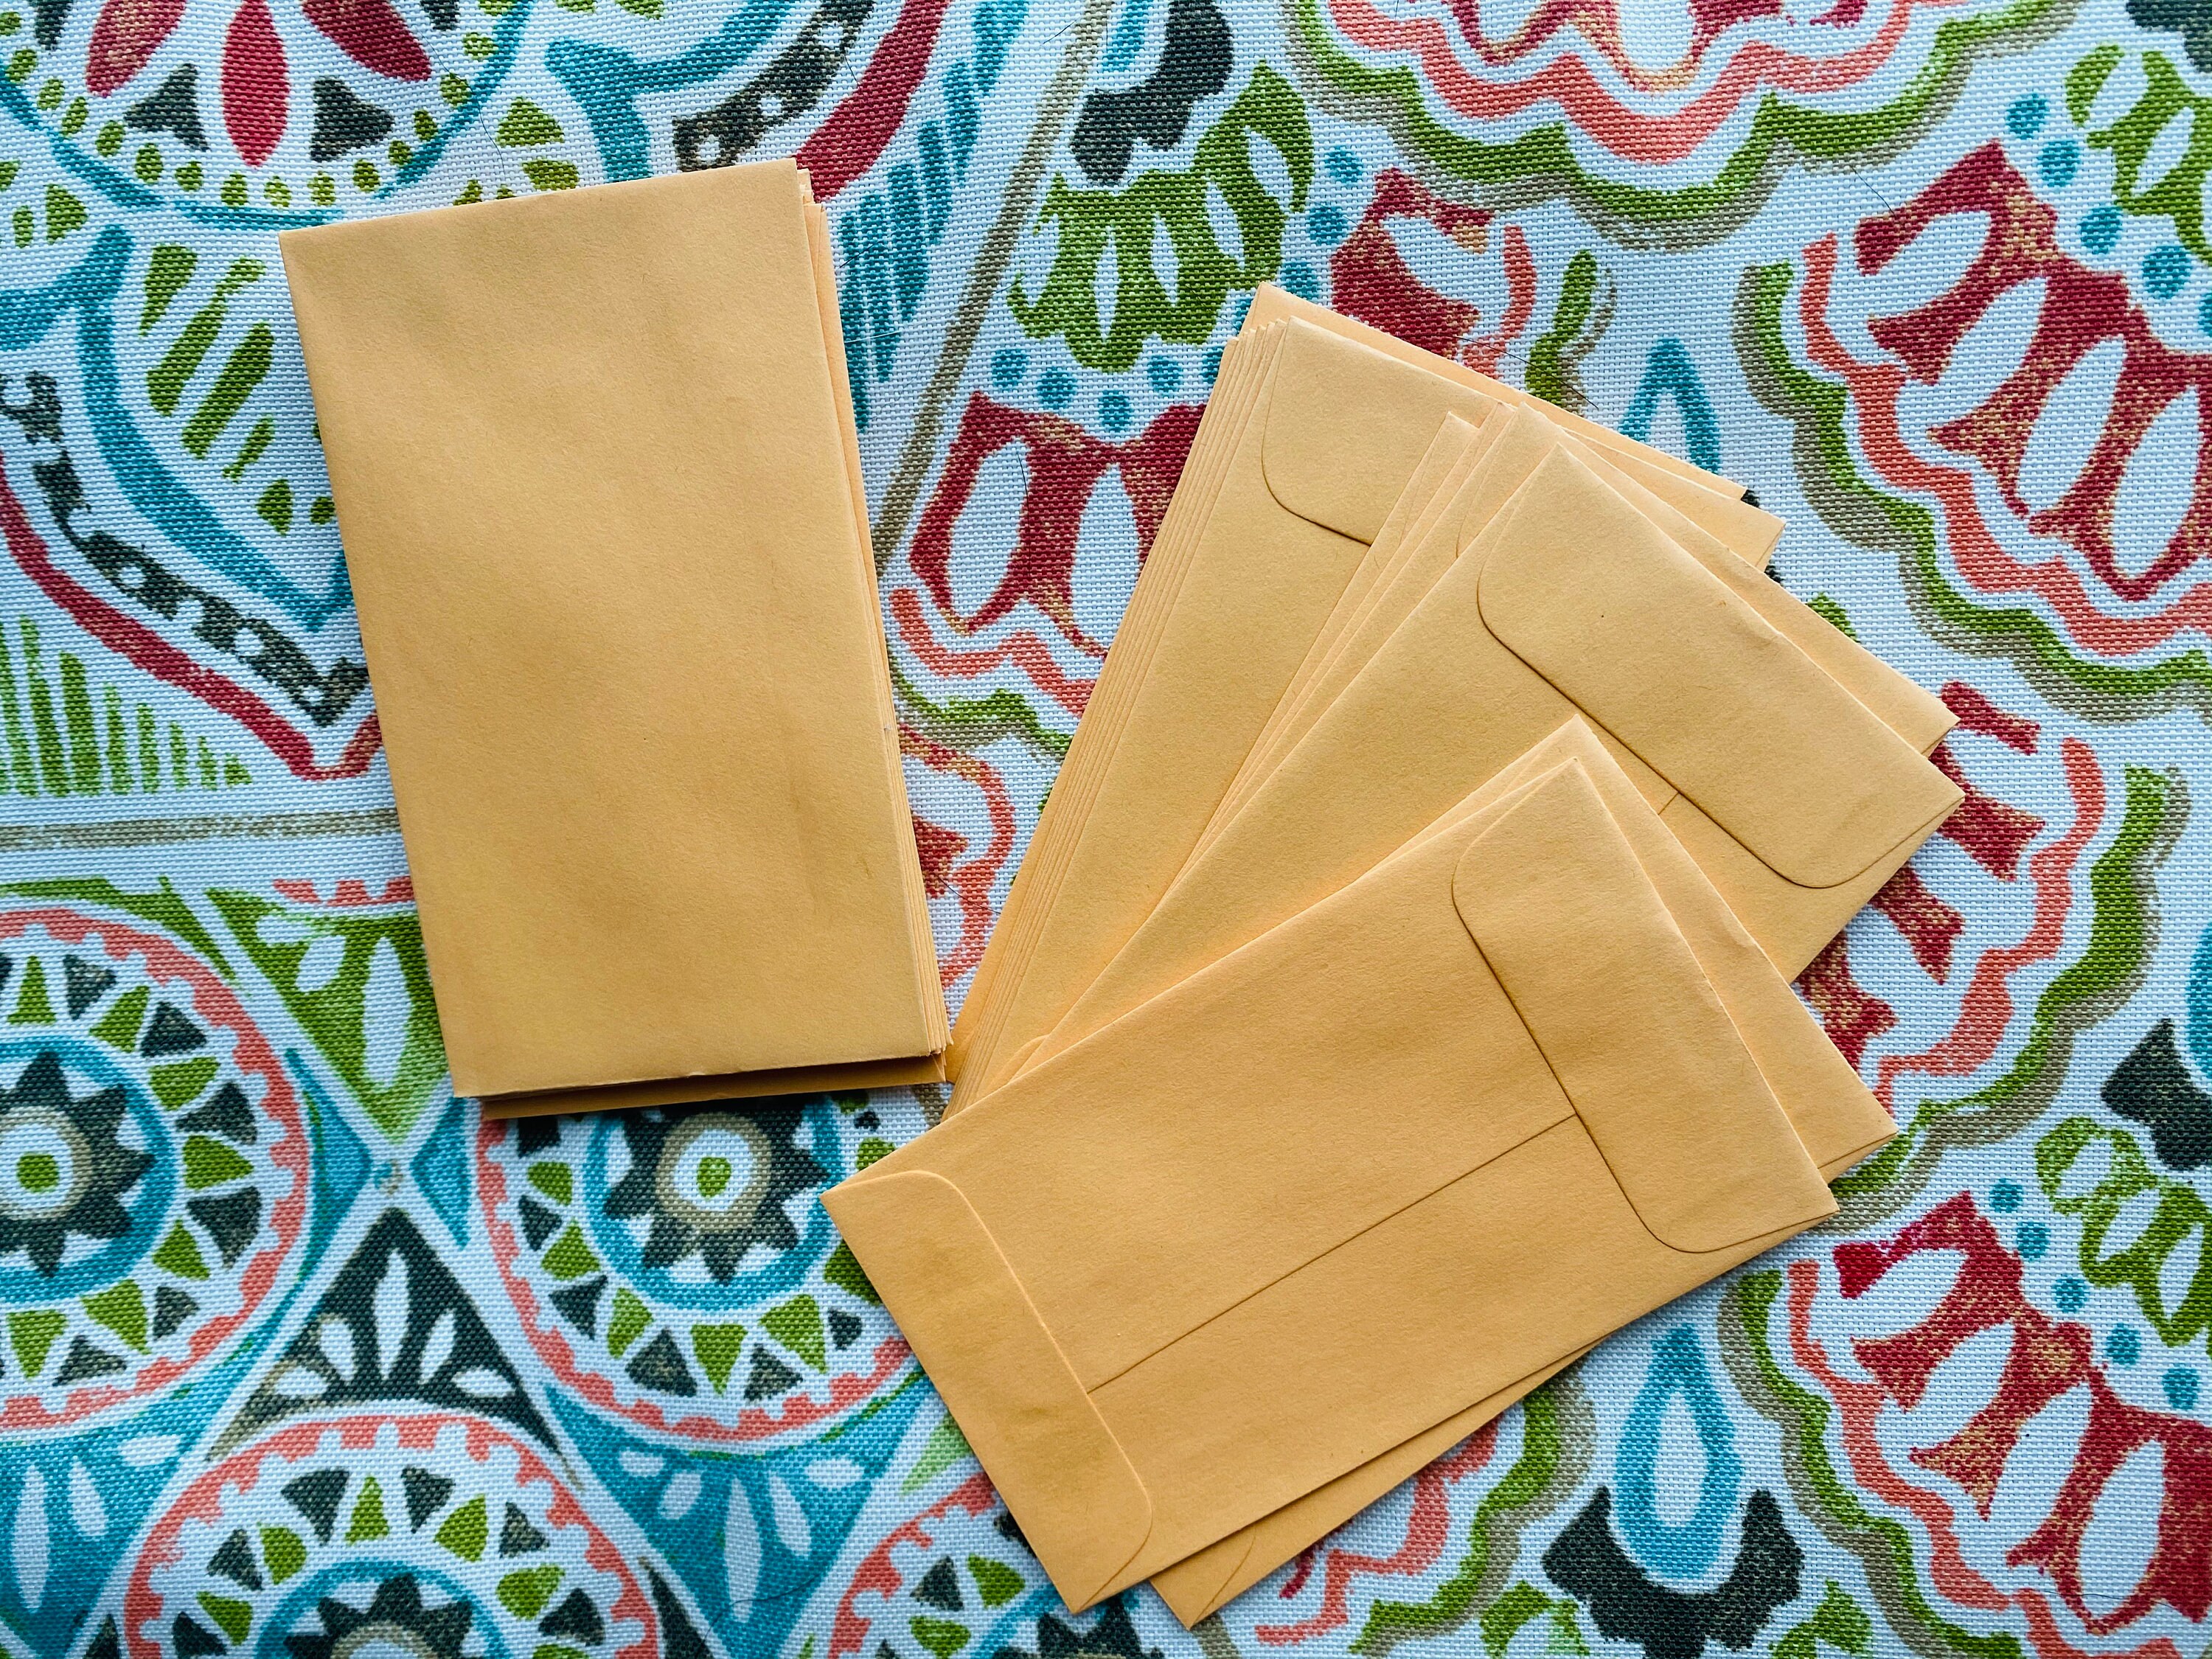 50 SMALL KRAFT COIN ENVELOPES  #3  SIZE 2.5" x 4.25"  WITH GUMMED FLAP USA made 